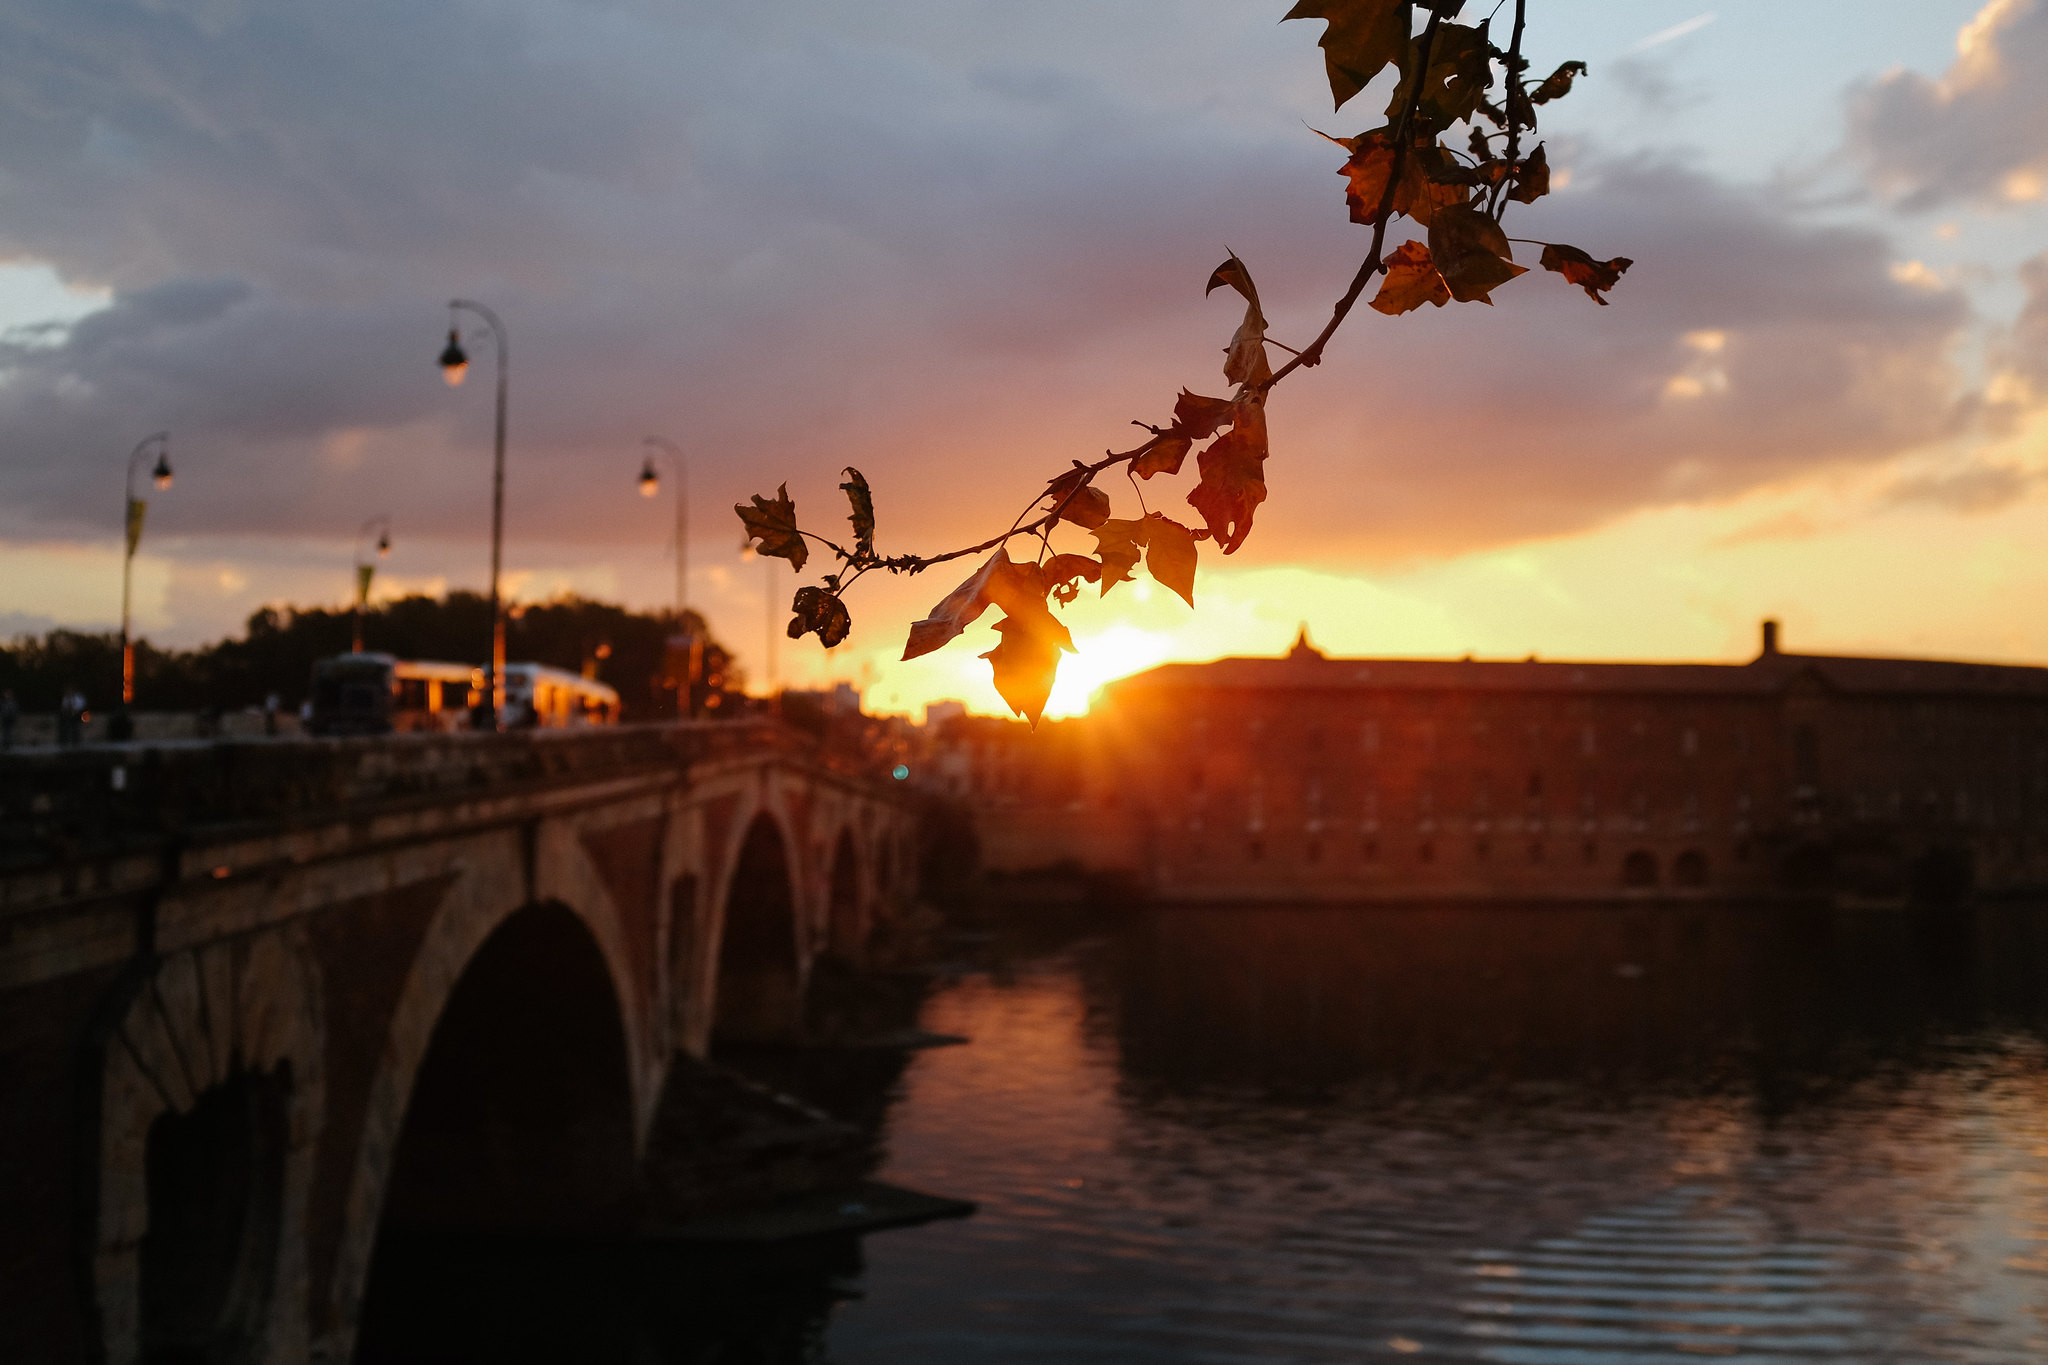 Sunset in Toulouse